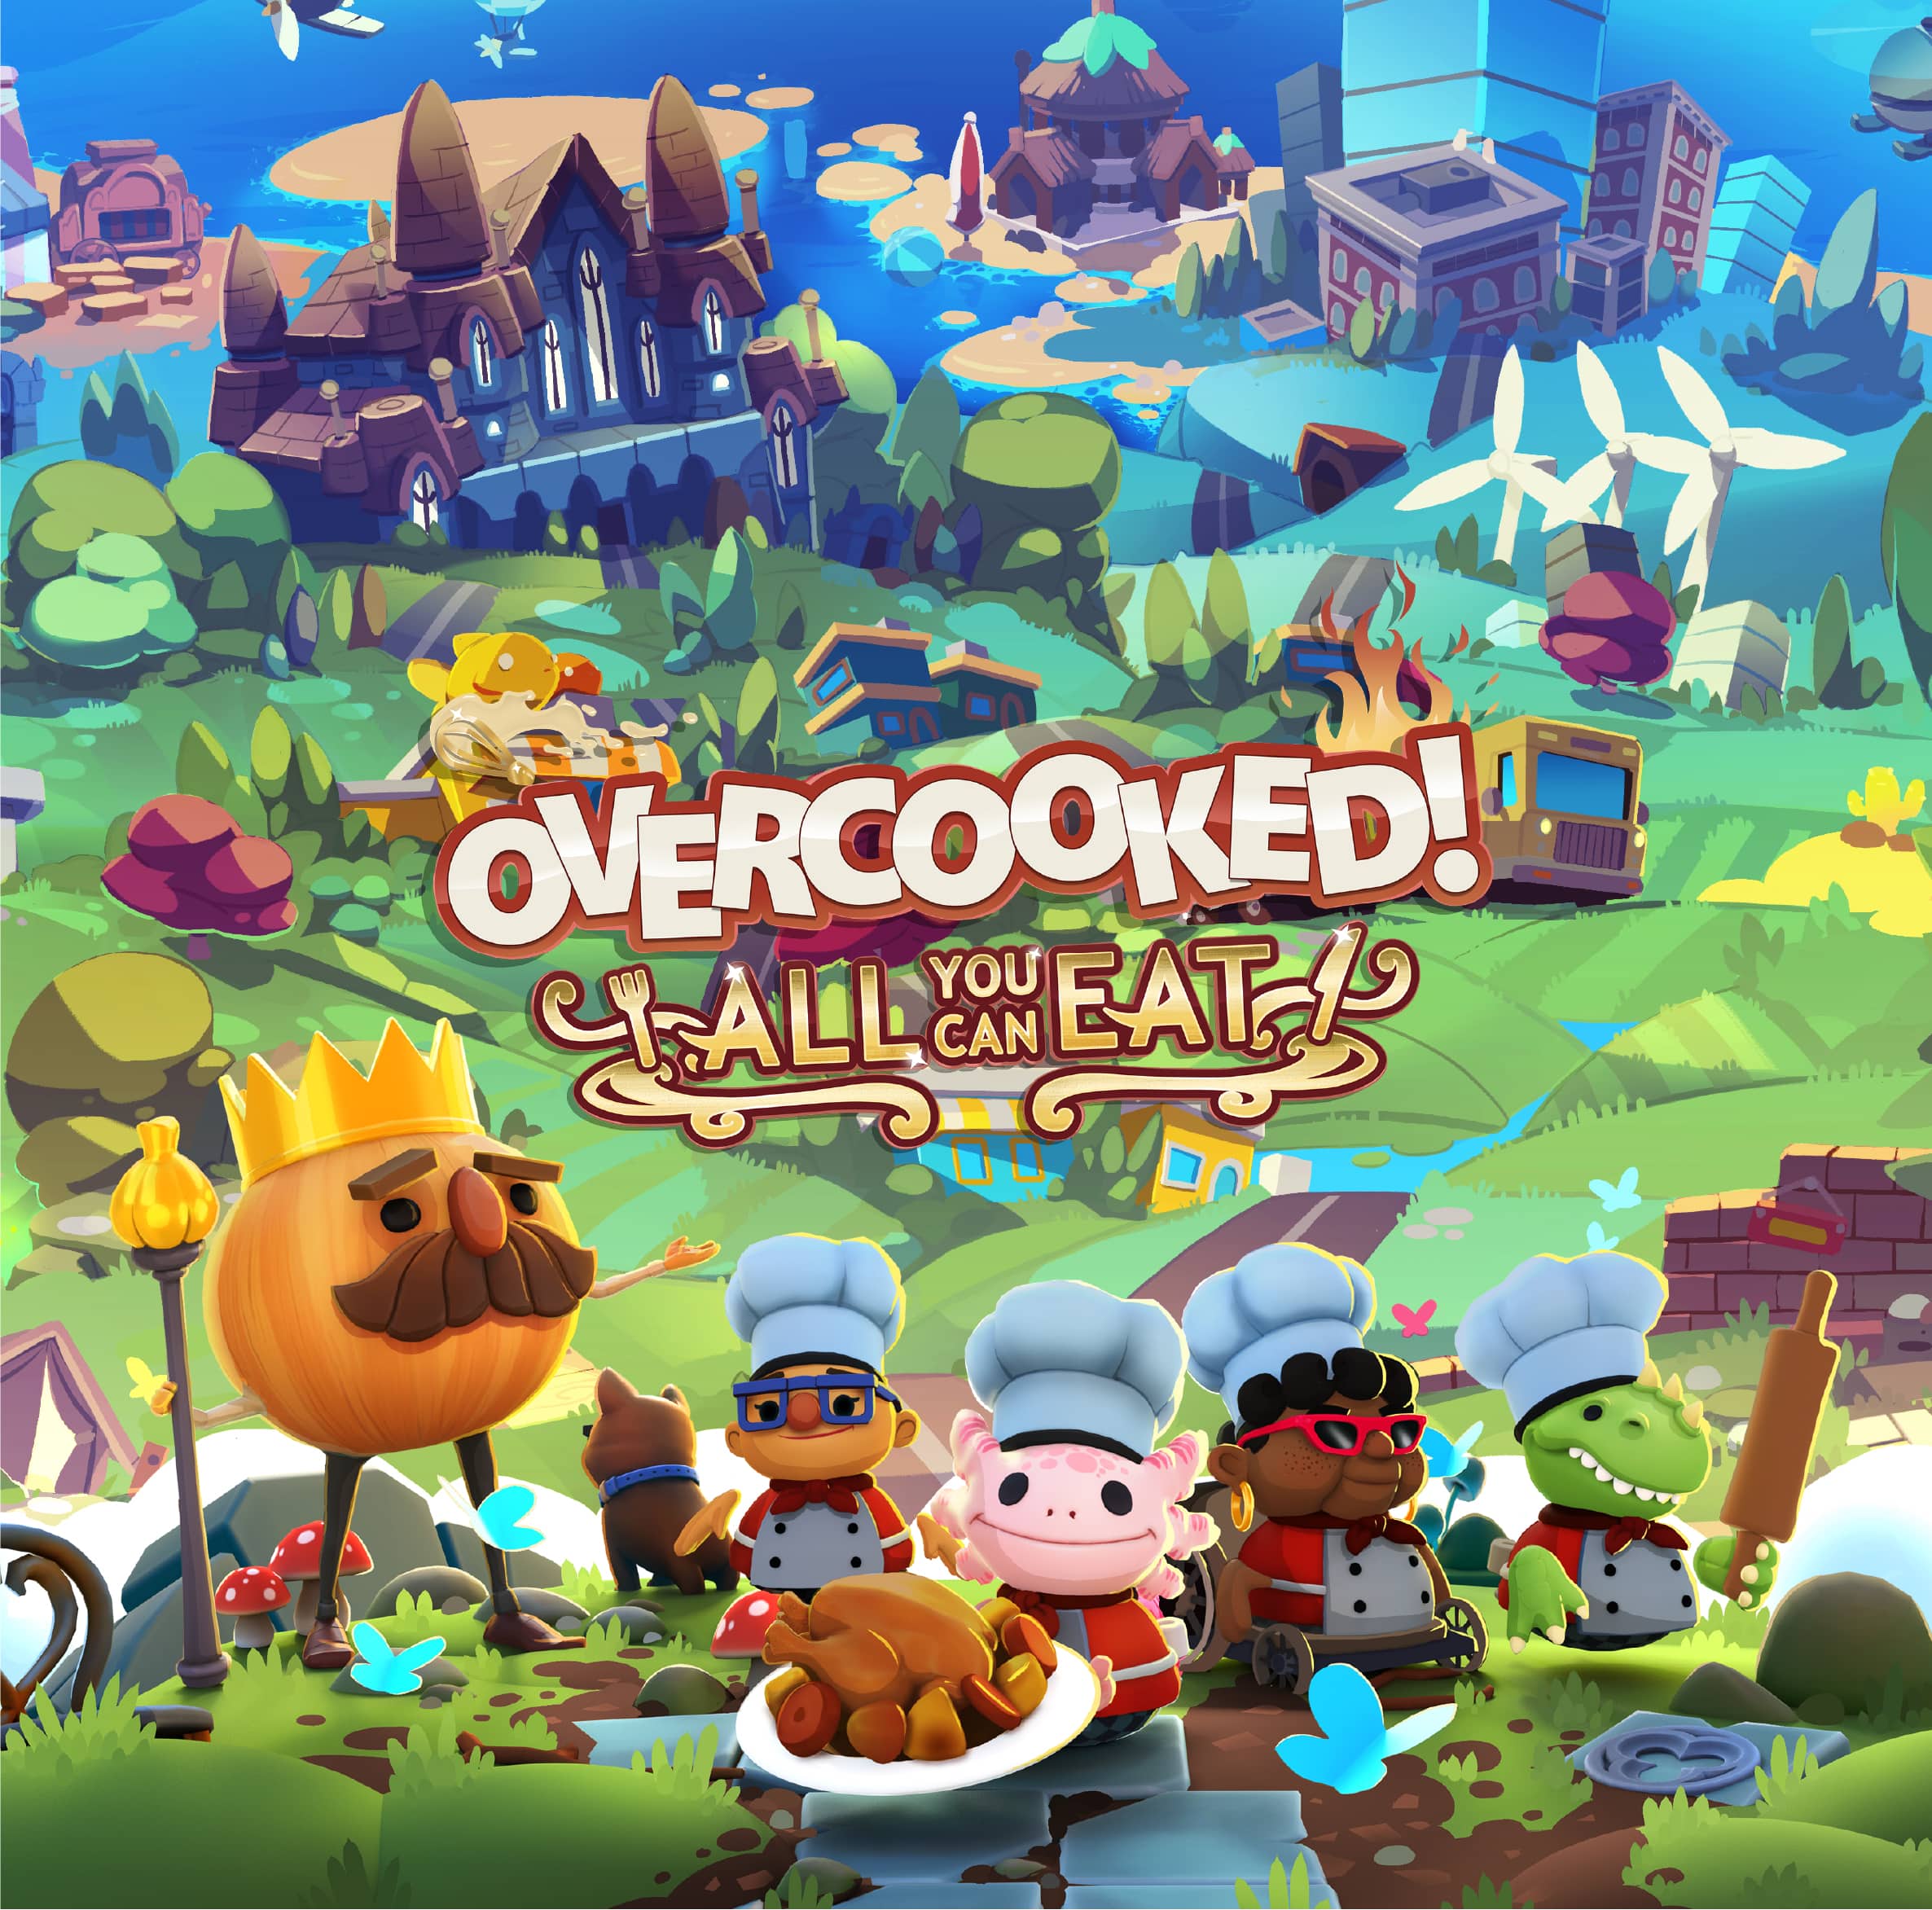 Overcooked! All You Can Eat next-gen overhaul compared to the original ...